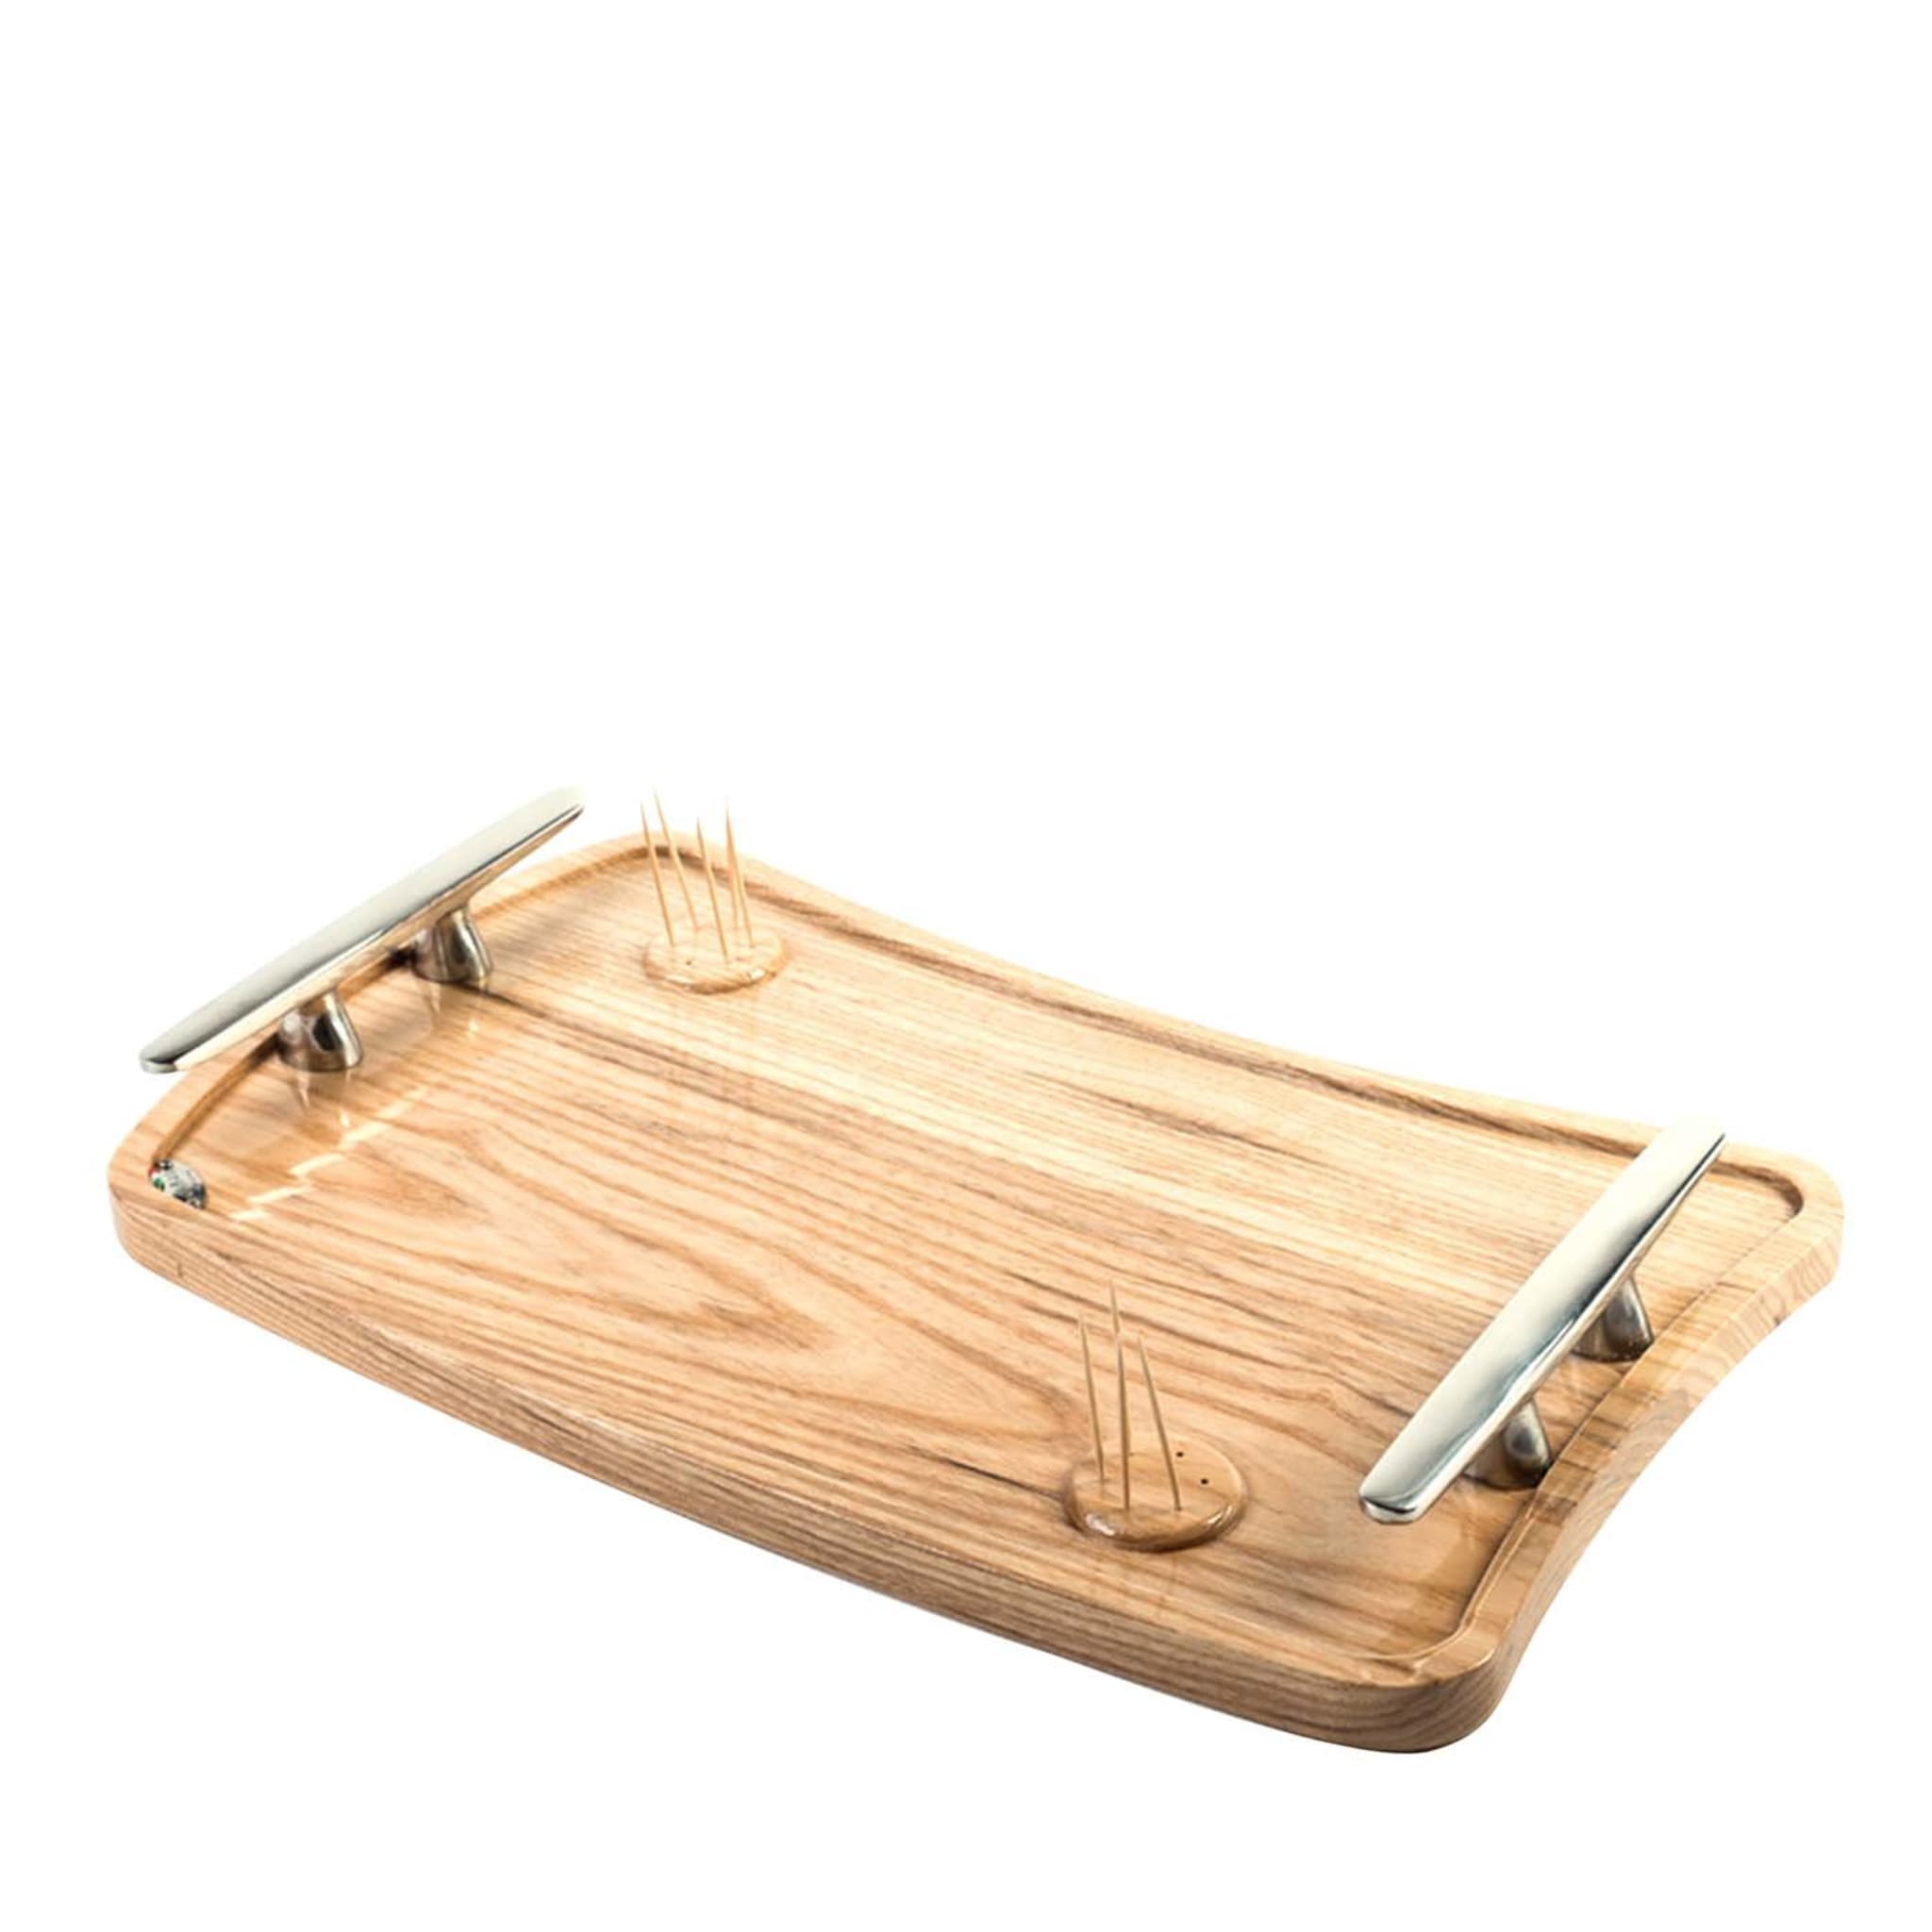 Cutting Board/Serving Tray - Main view